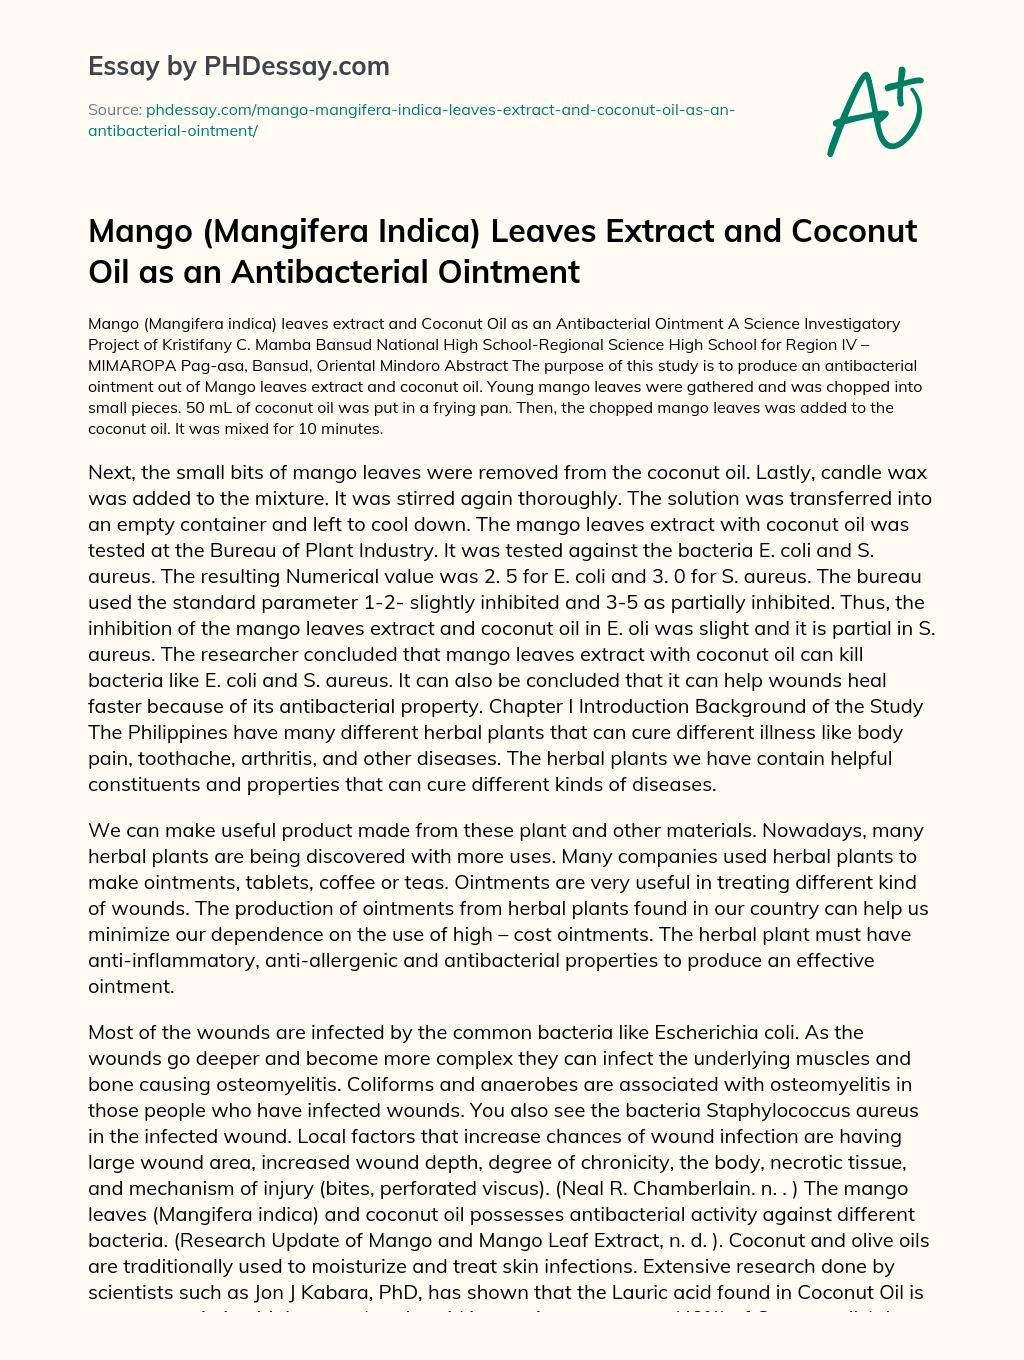 Mango (Mangifera Indica) Leaves Extract and Coconut Oil as an Antibacterial Ointment essay